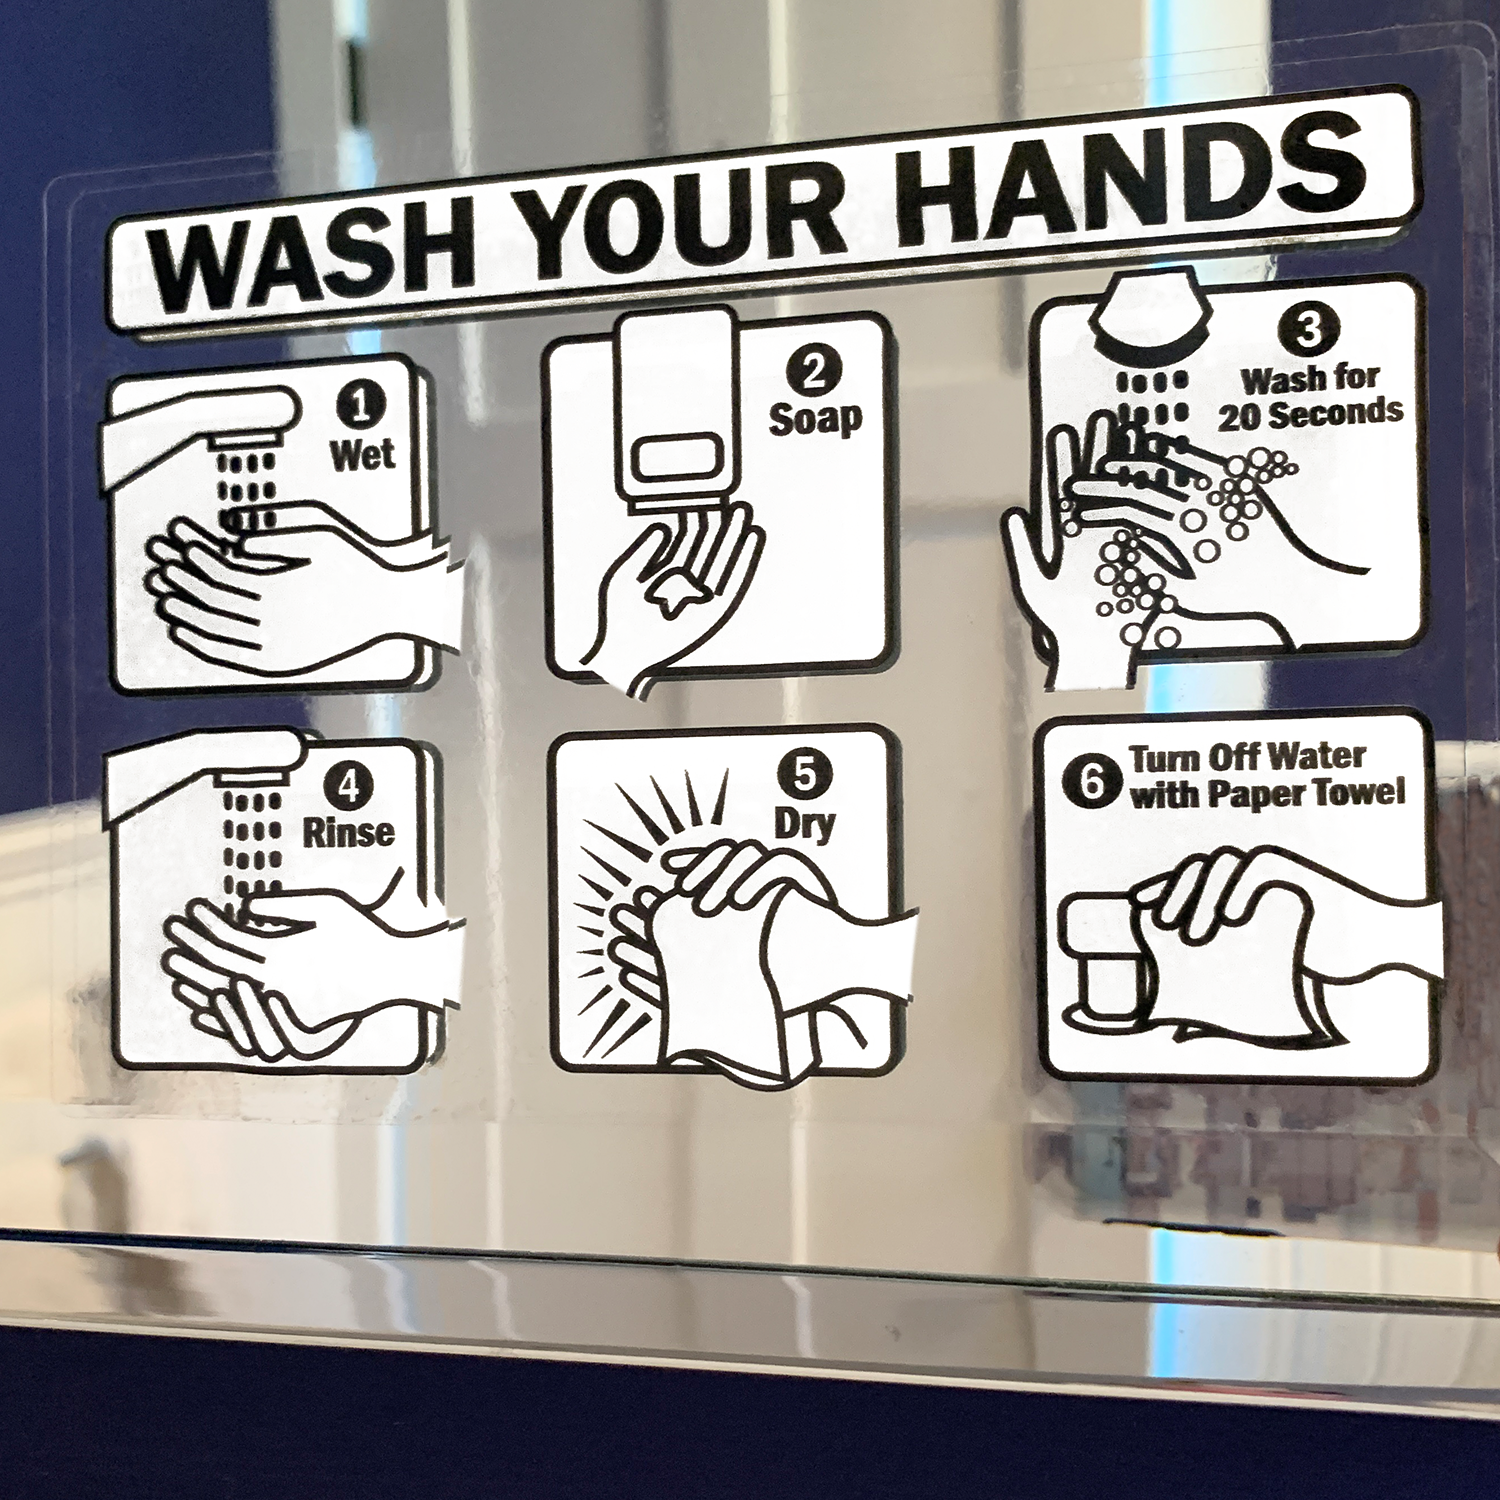 Wash Your Hands Clear Bathroom Decal with Step by Step Instruction Guide  Signs, SKU: LB-4306